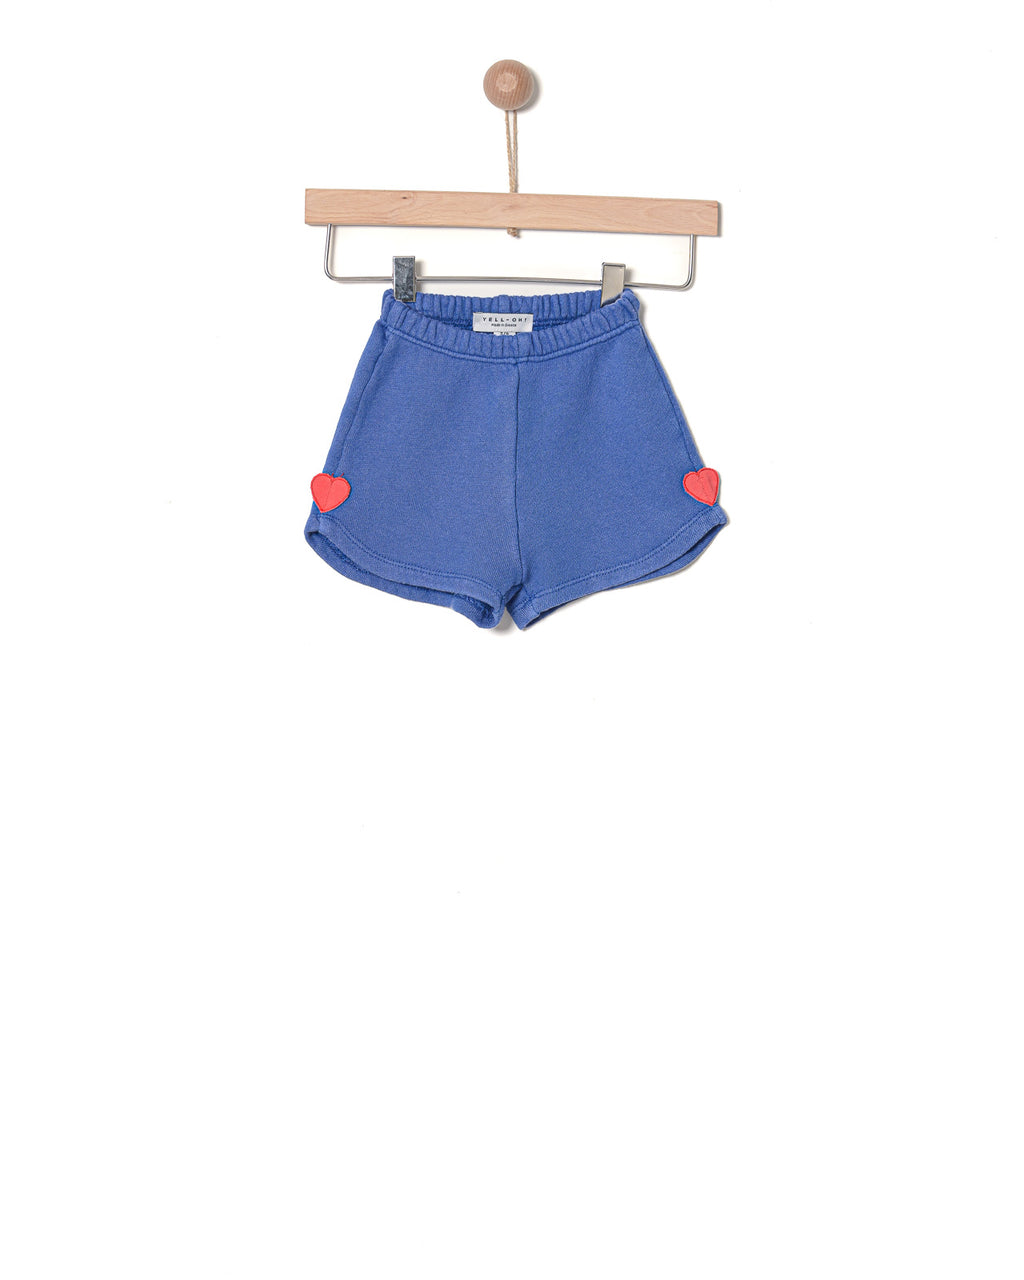 Yell-Oh Shorts Vintage Wash - Blue / Heart